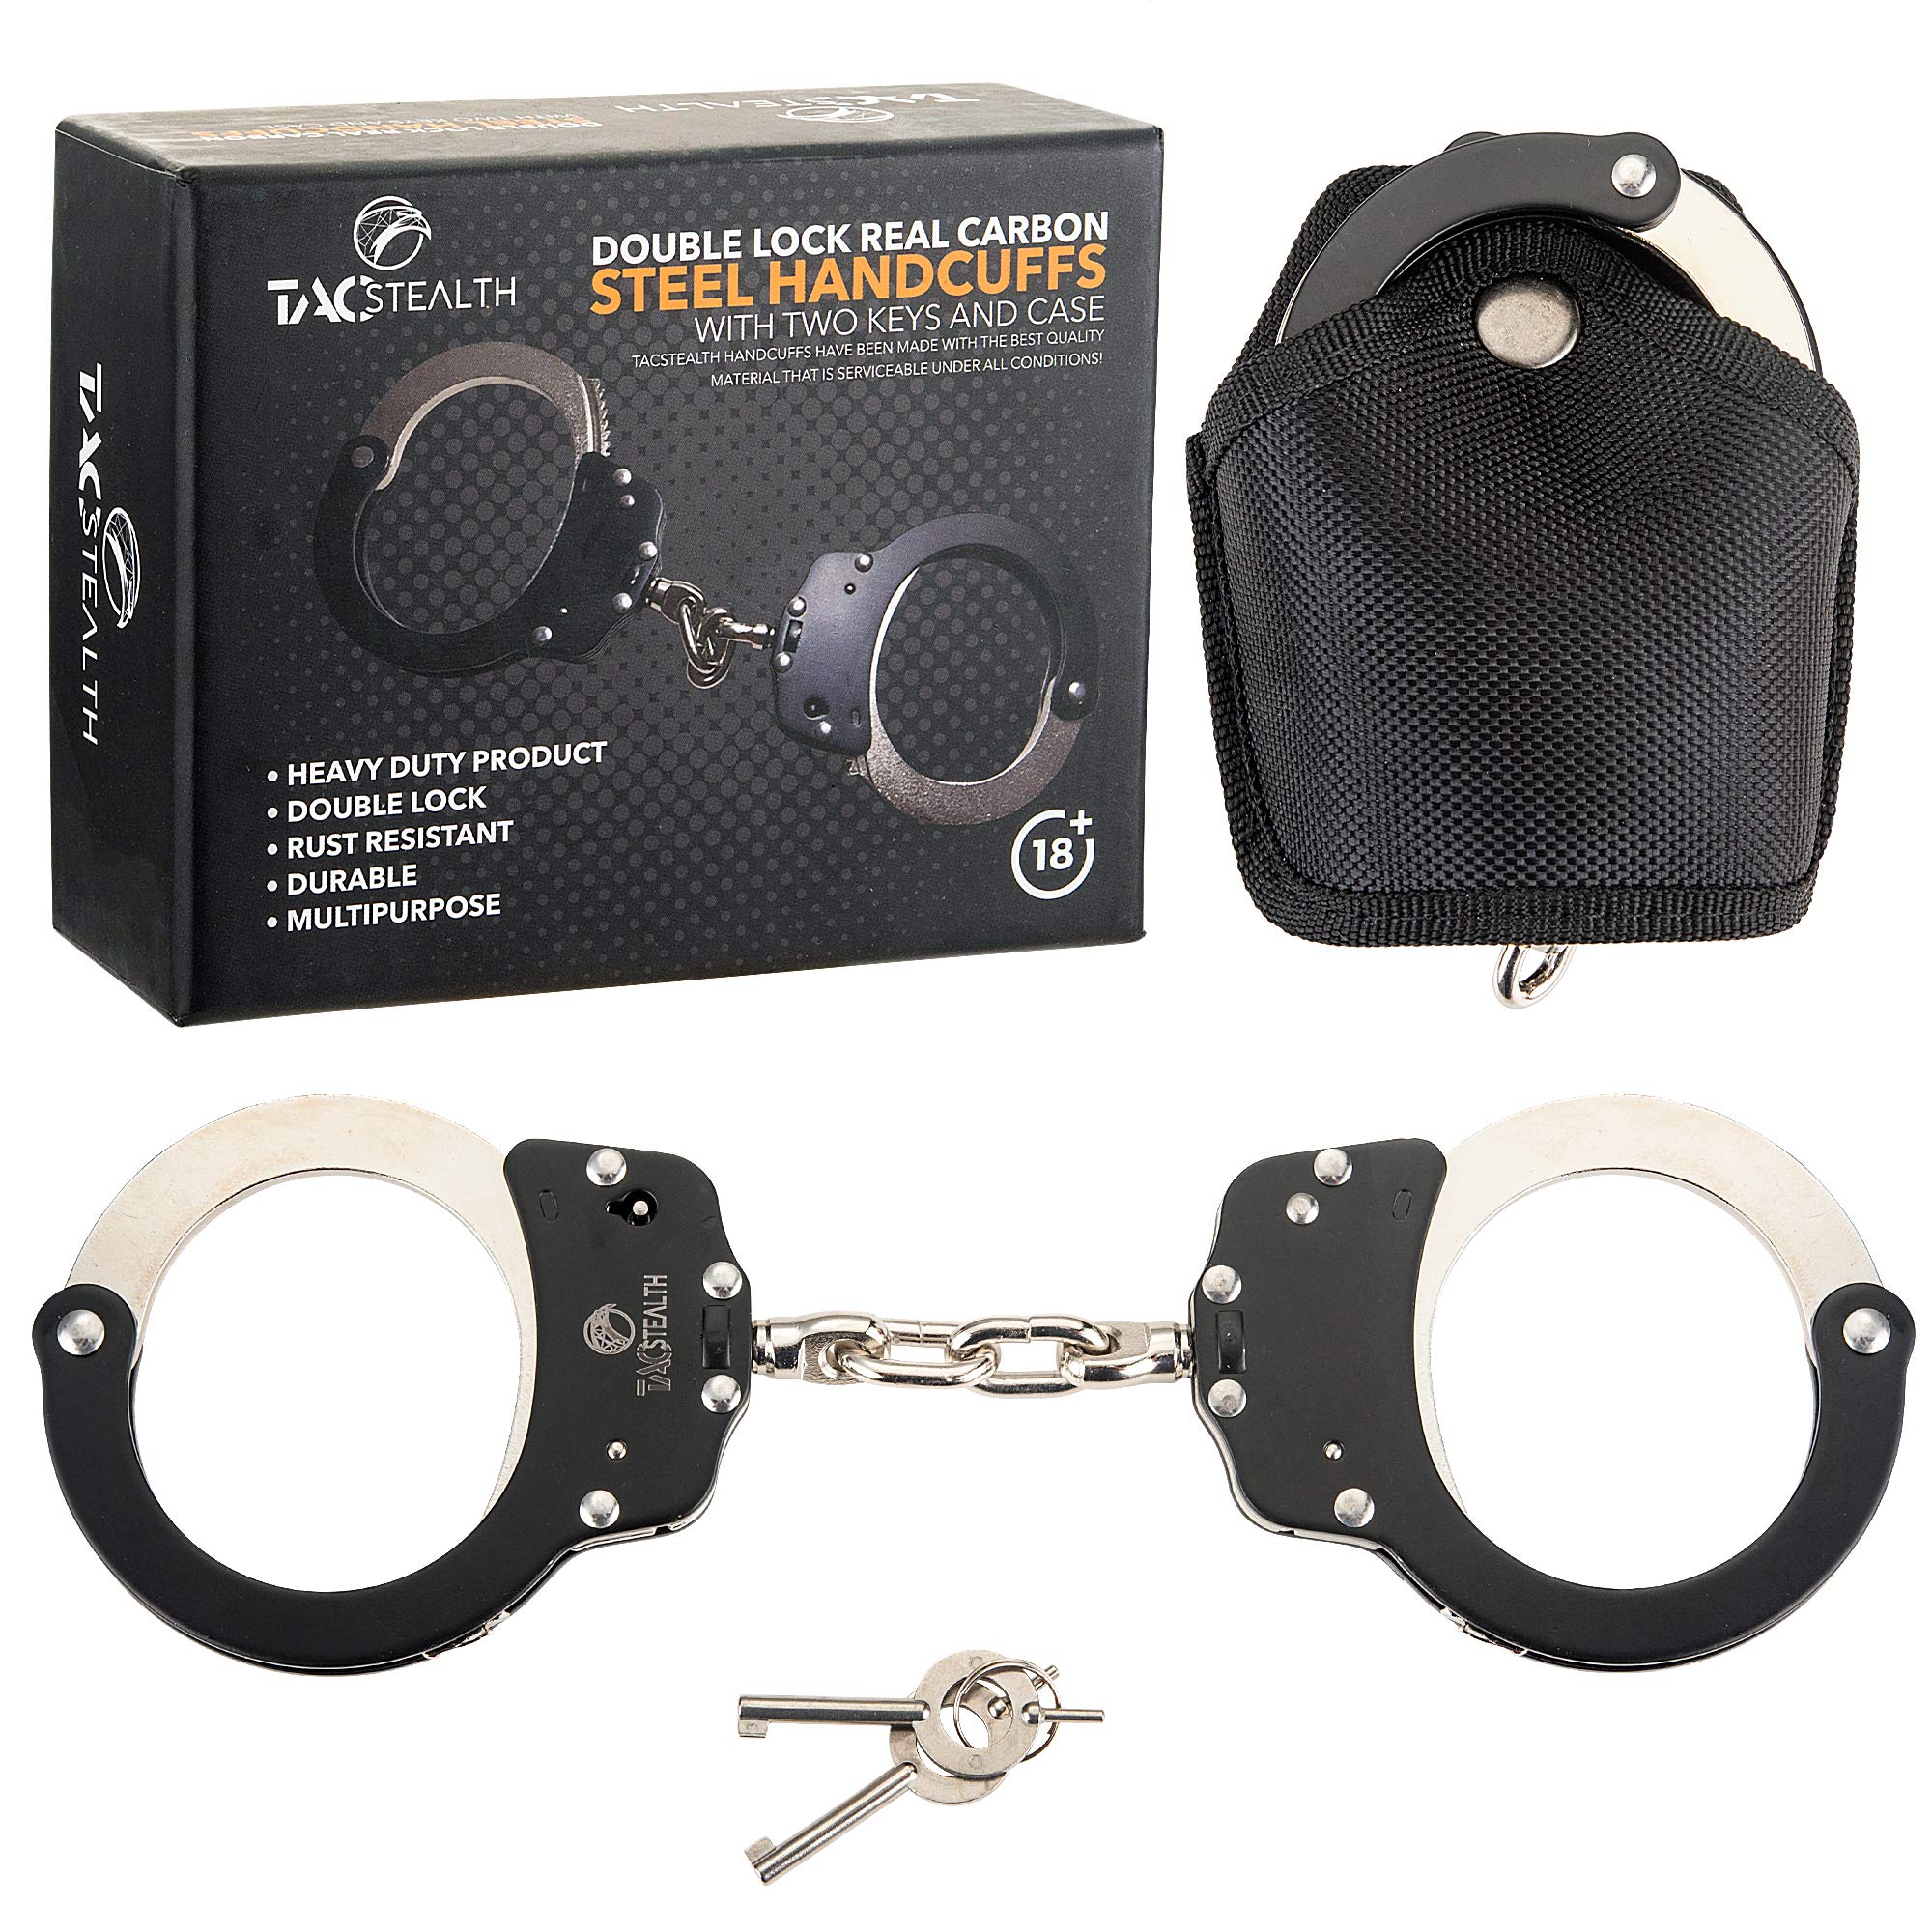 TacStealth Handcuffs with Two Keys  Handcuffs case Heavy Duty Black and Silver Steal Professional grade BendBreak Free Secure Ha